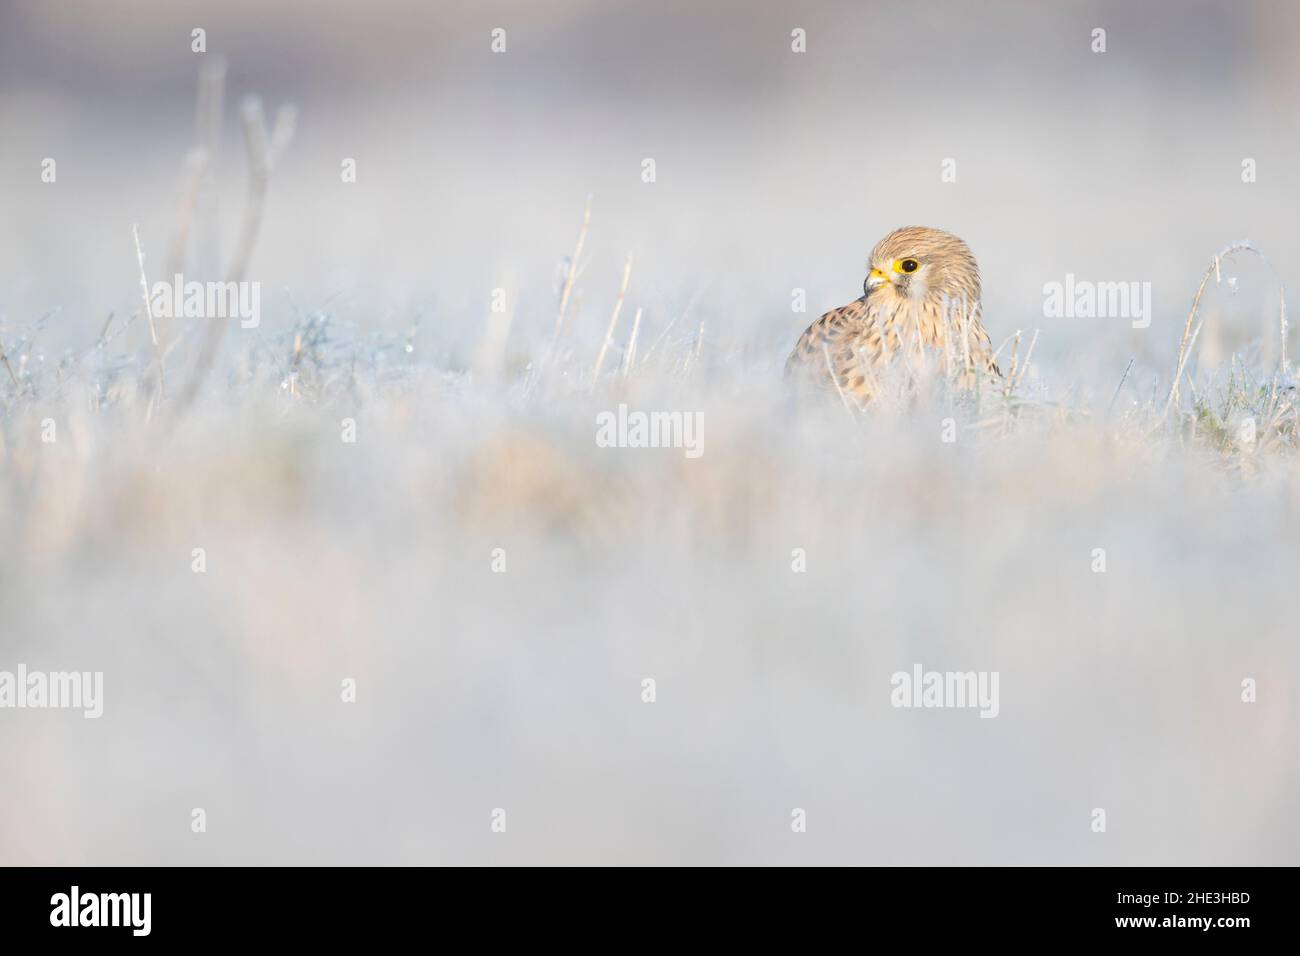 A common kestrel (Falco tinnunculus) viewed from a low angle resting in a frozen meadow. Stock Photo